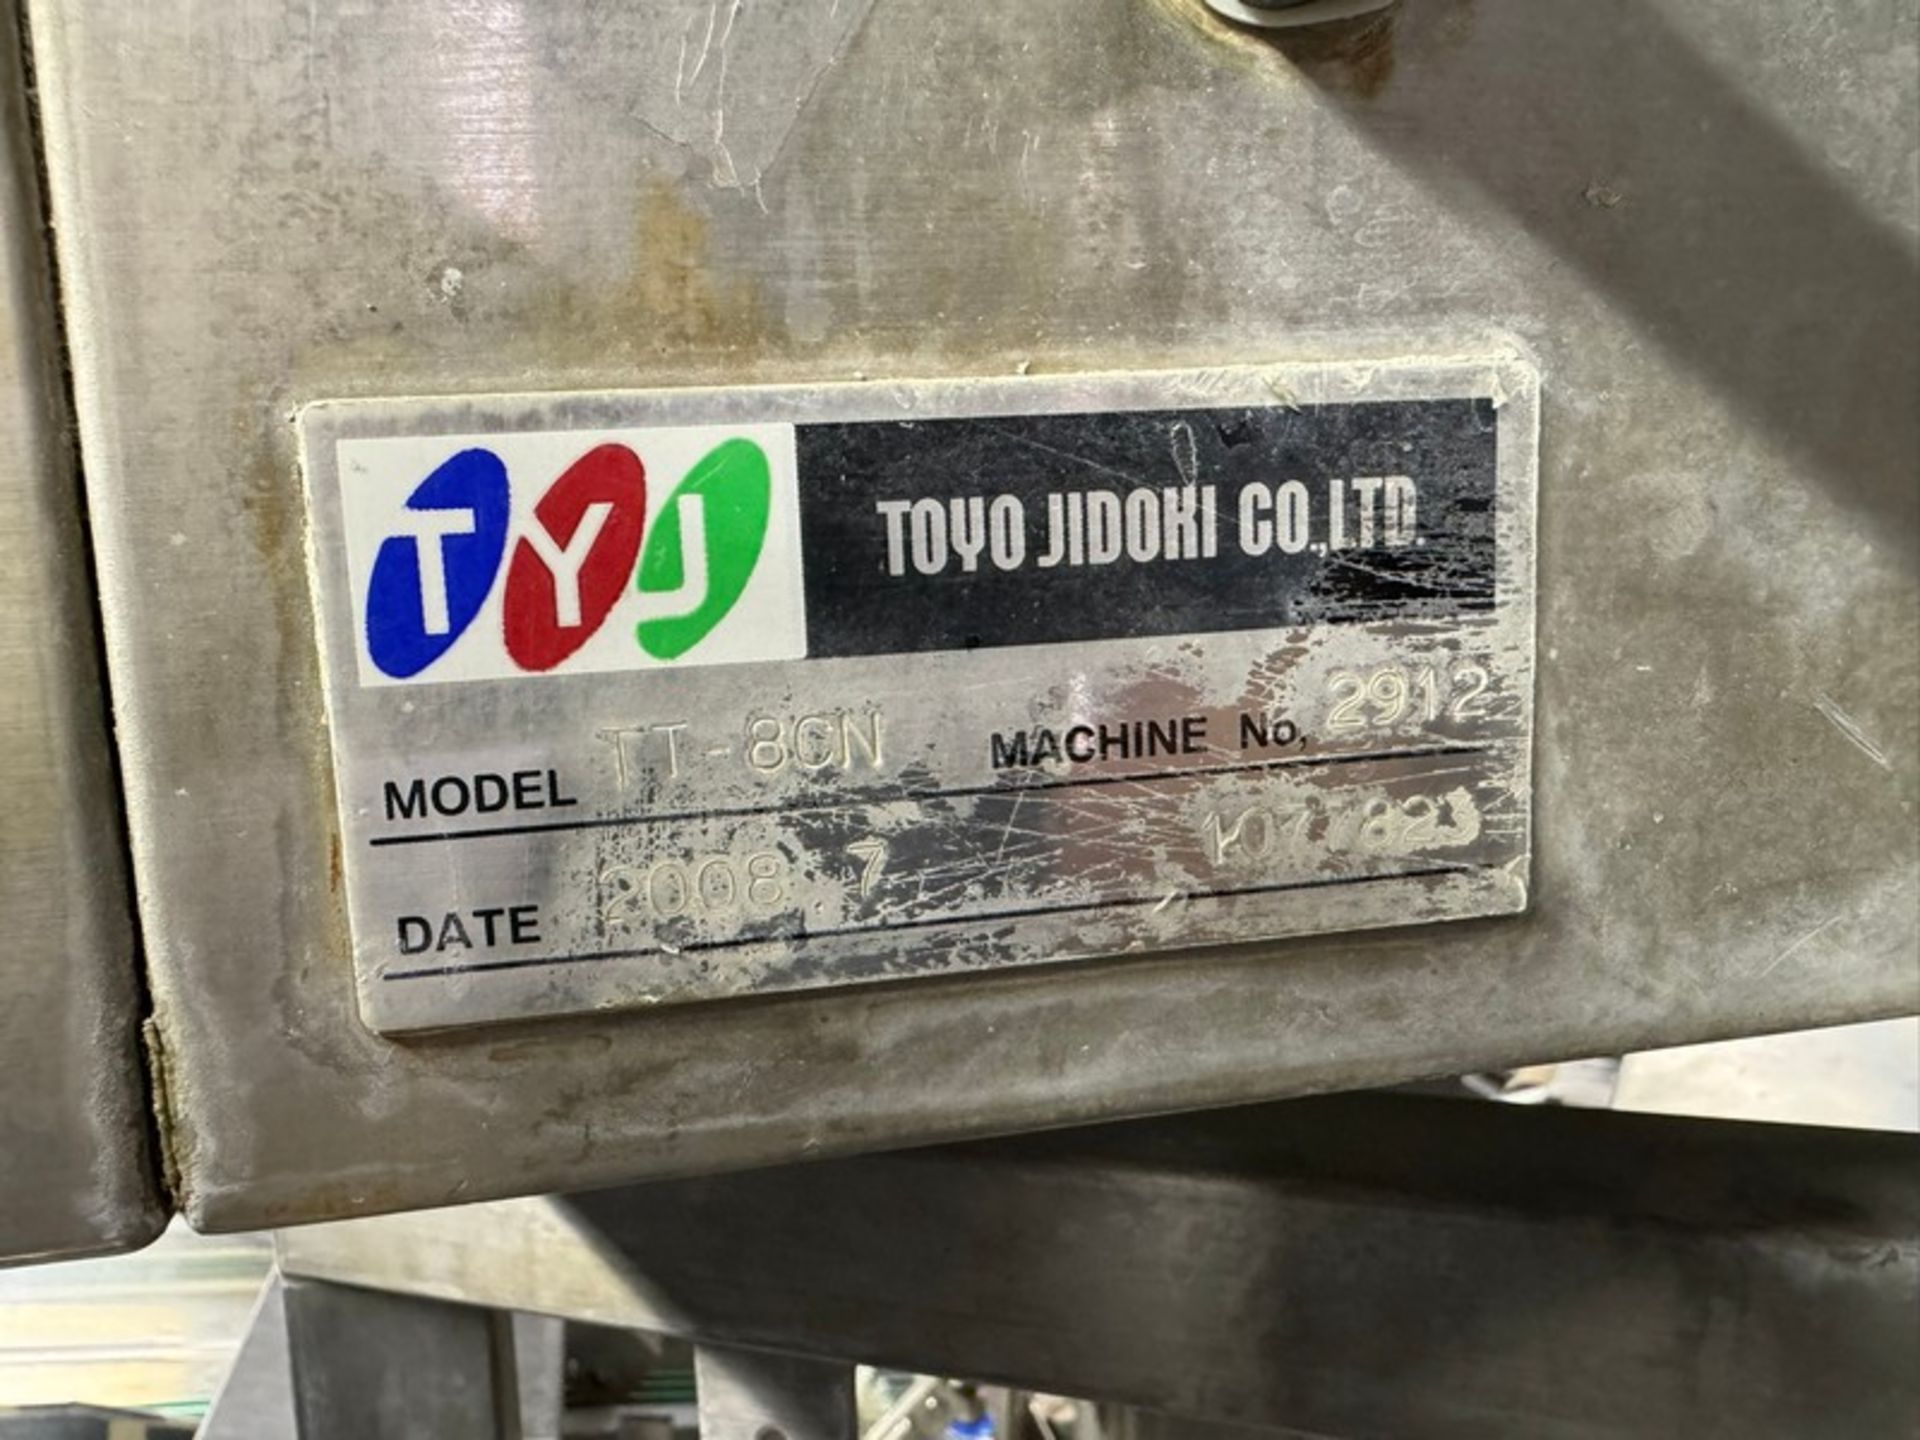 2008 Toyo JIDIKI Co, 8-Head Rotary Pouch Filler, M/N IT-8CN, Machine No. 2913, with Infeed & - Image 8 of 16